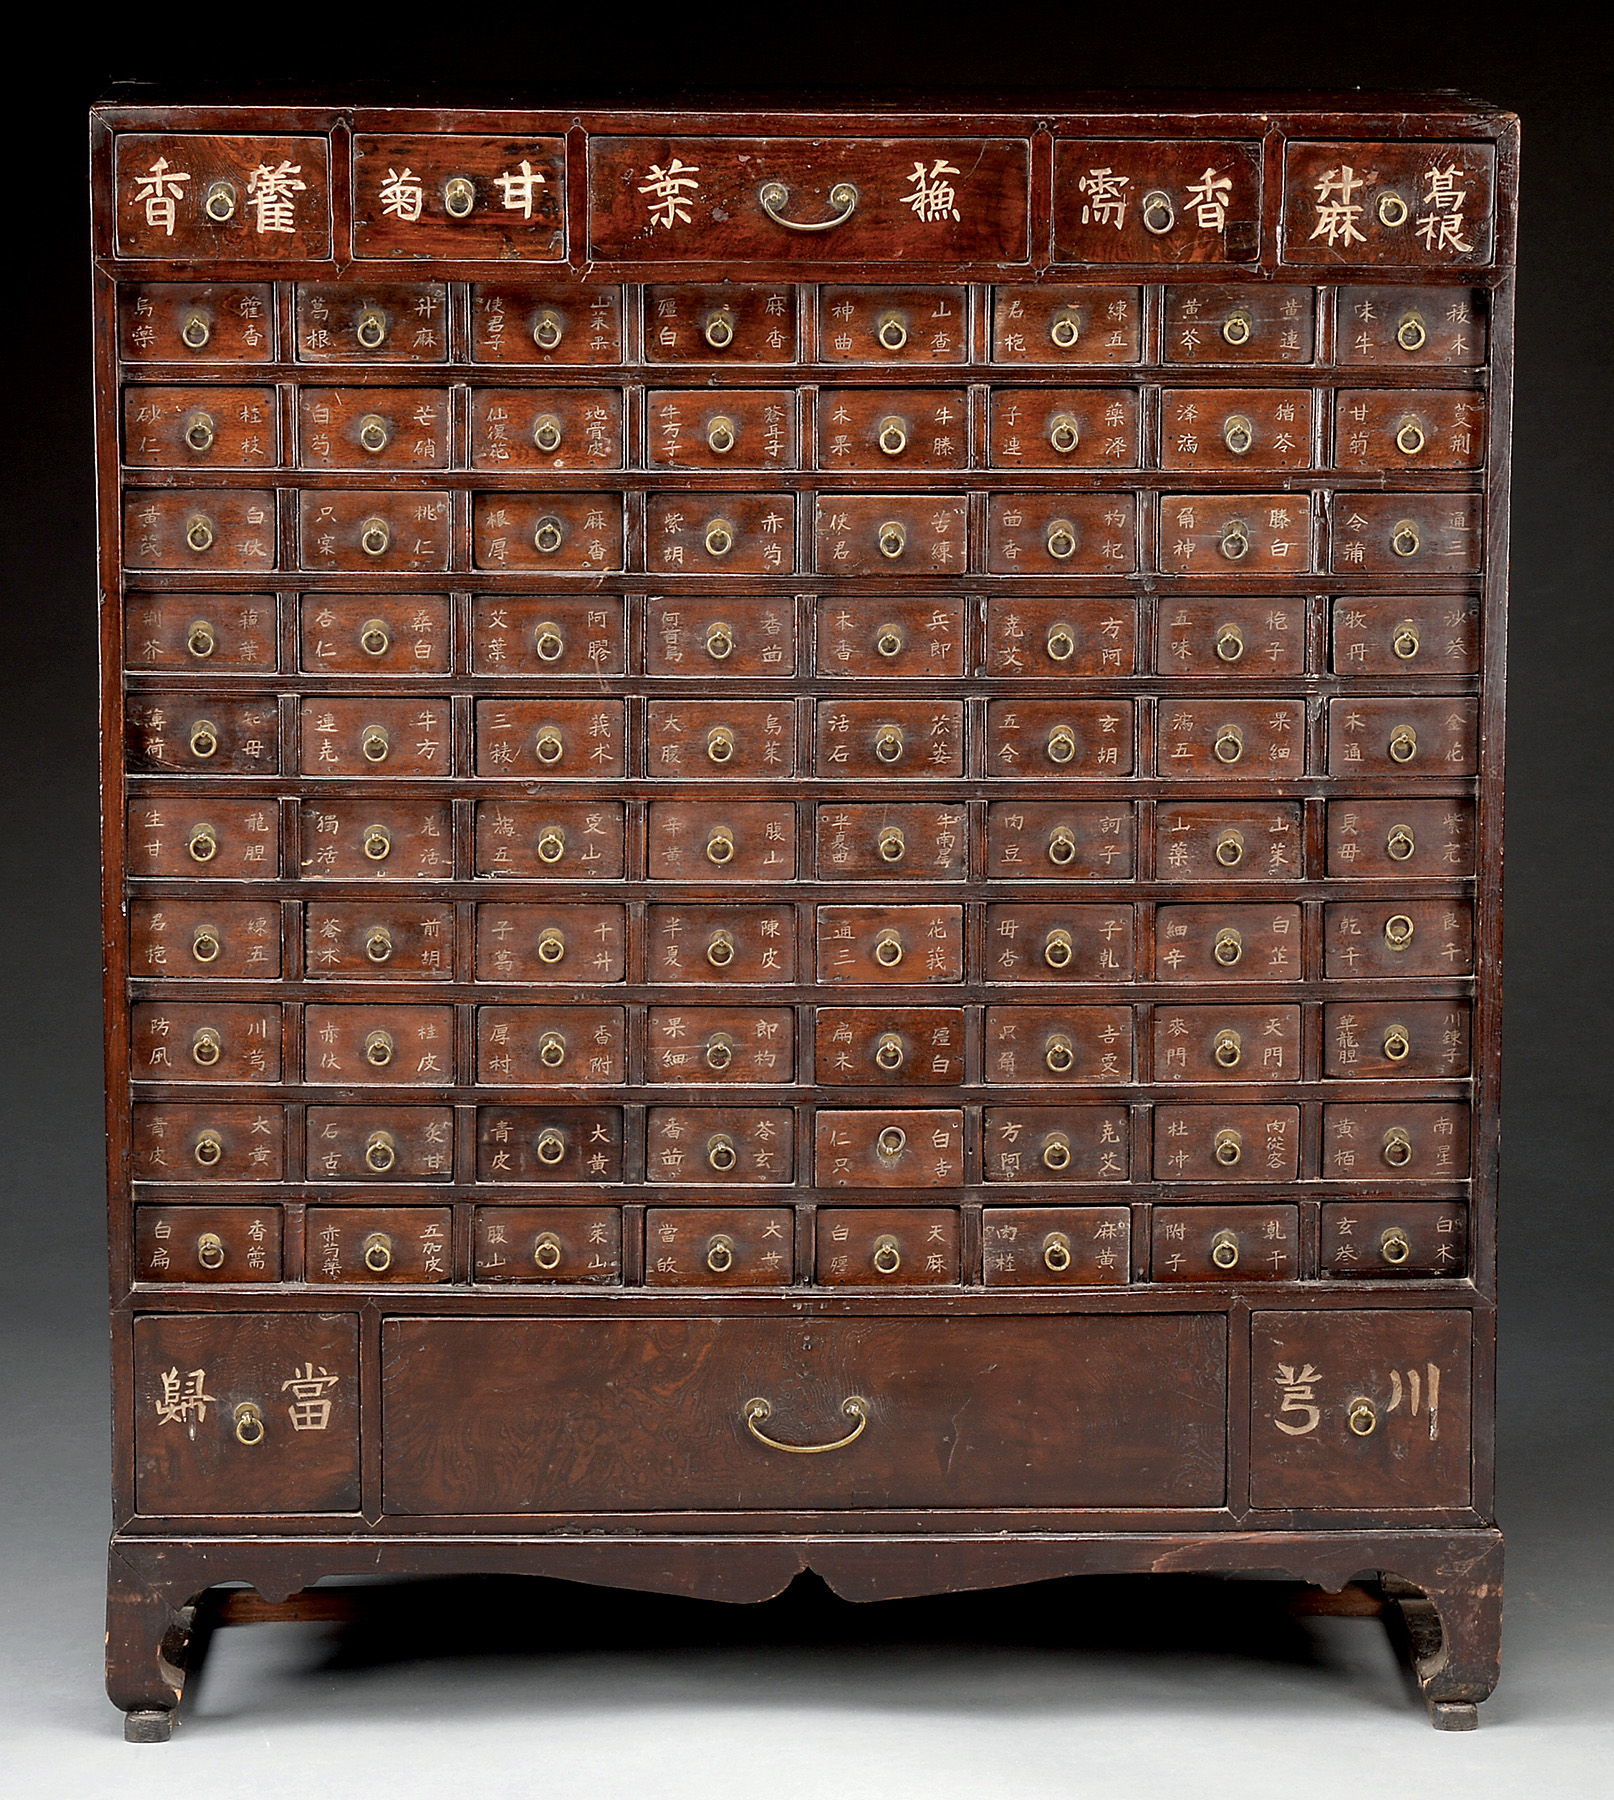 This lacquered Chinese apothecary chest with 80 drawers sold at a James D. Julia auction in January for $948. It has metal hardware.